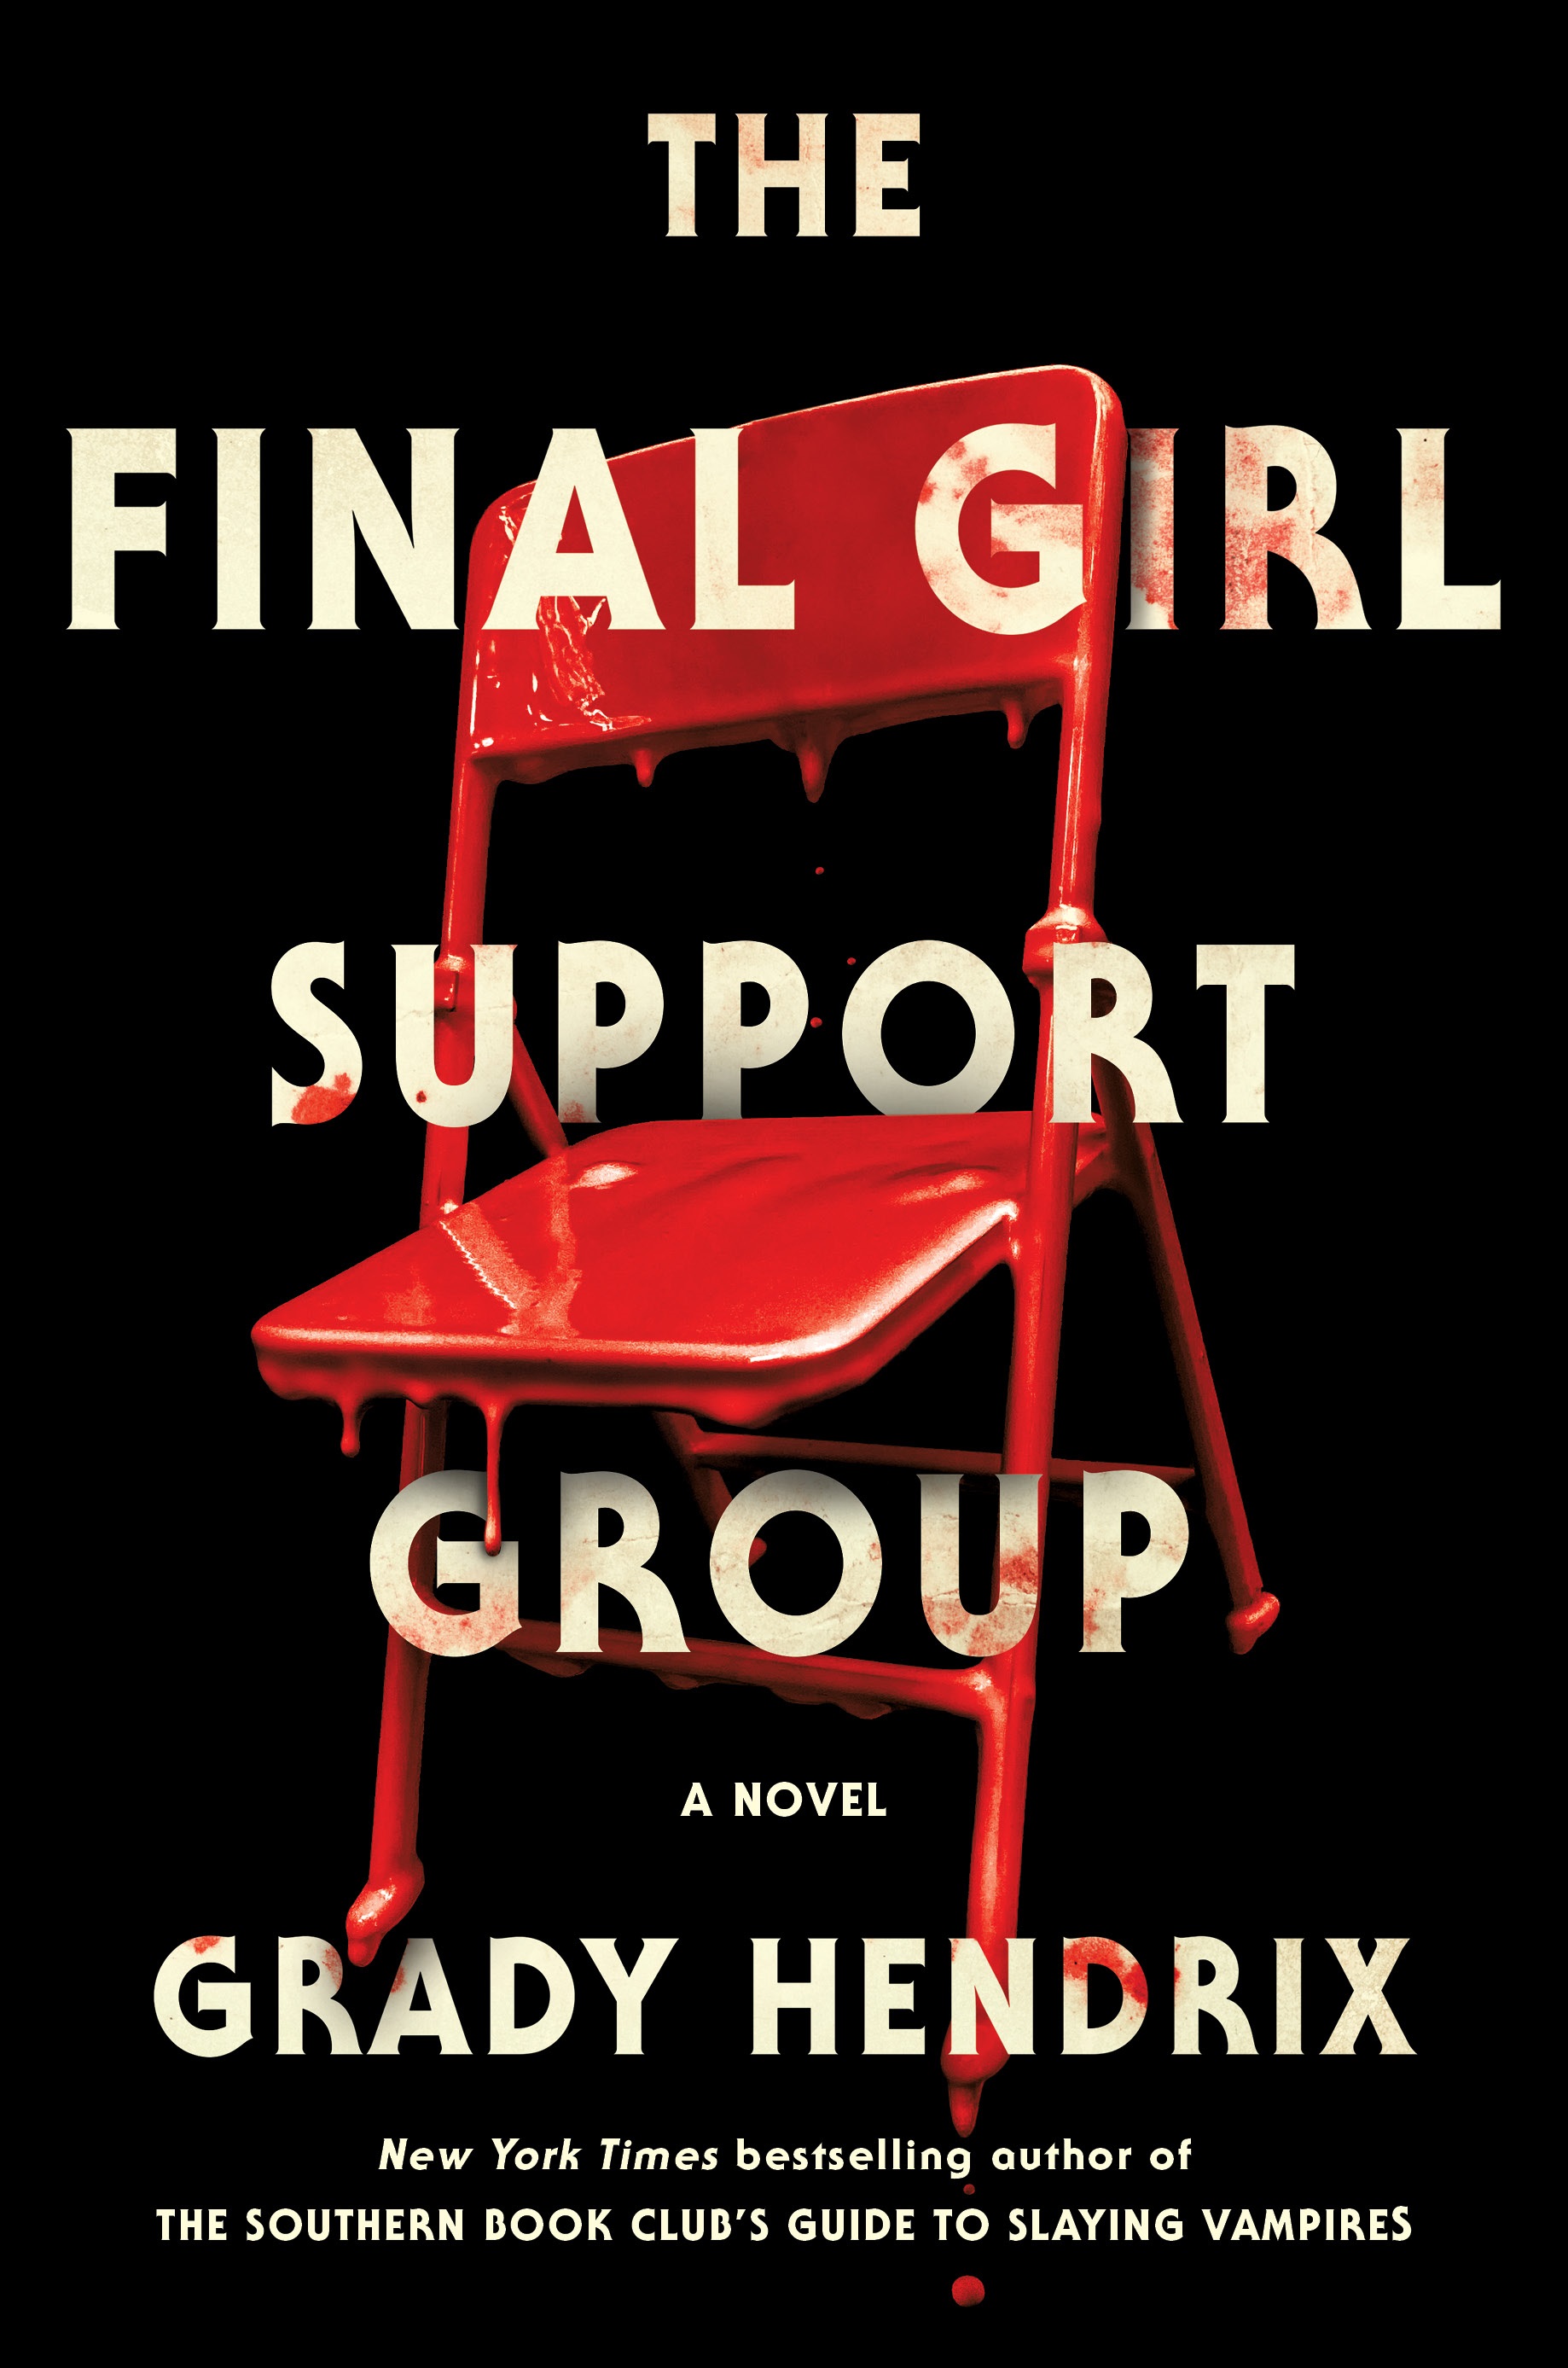 Image for "The Final Girl Support Group"